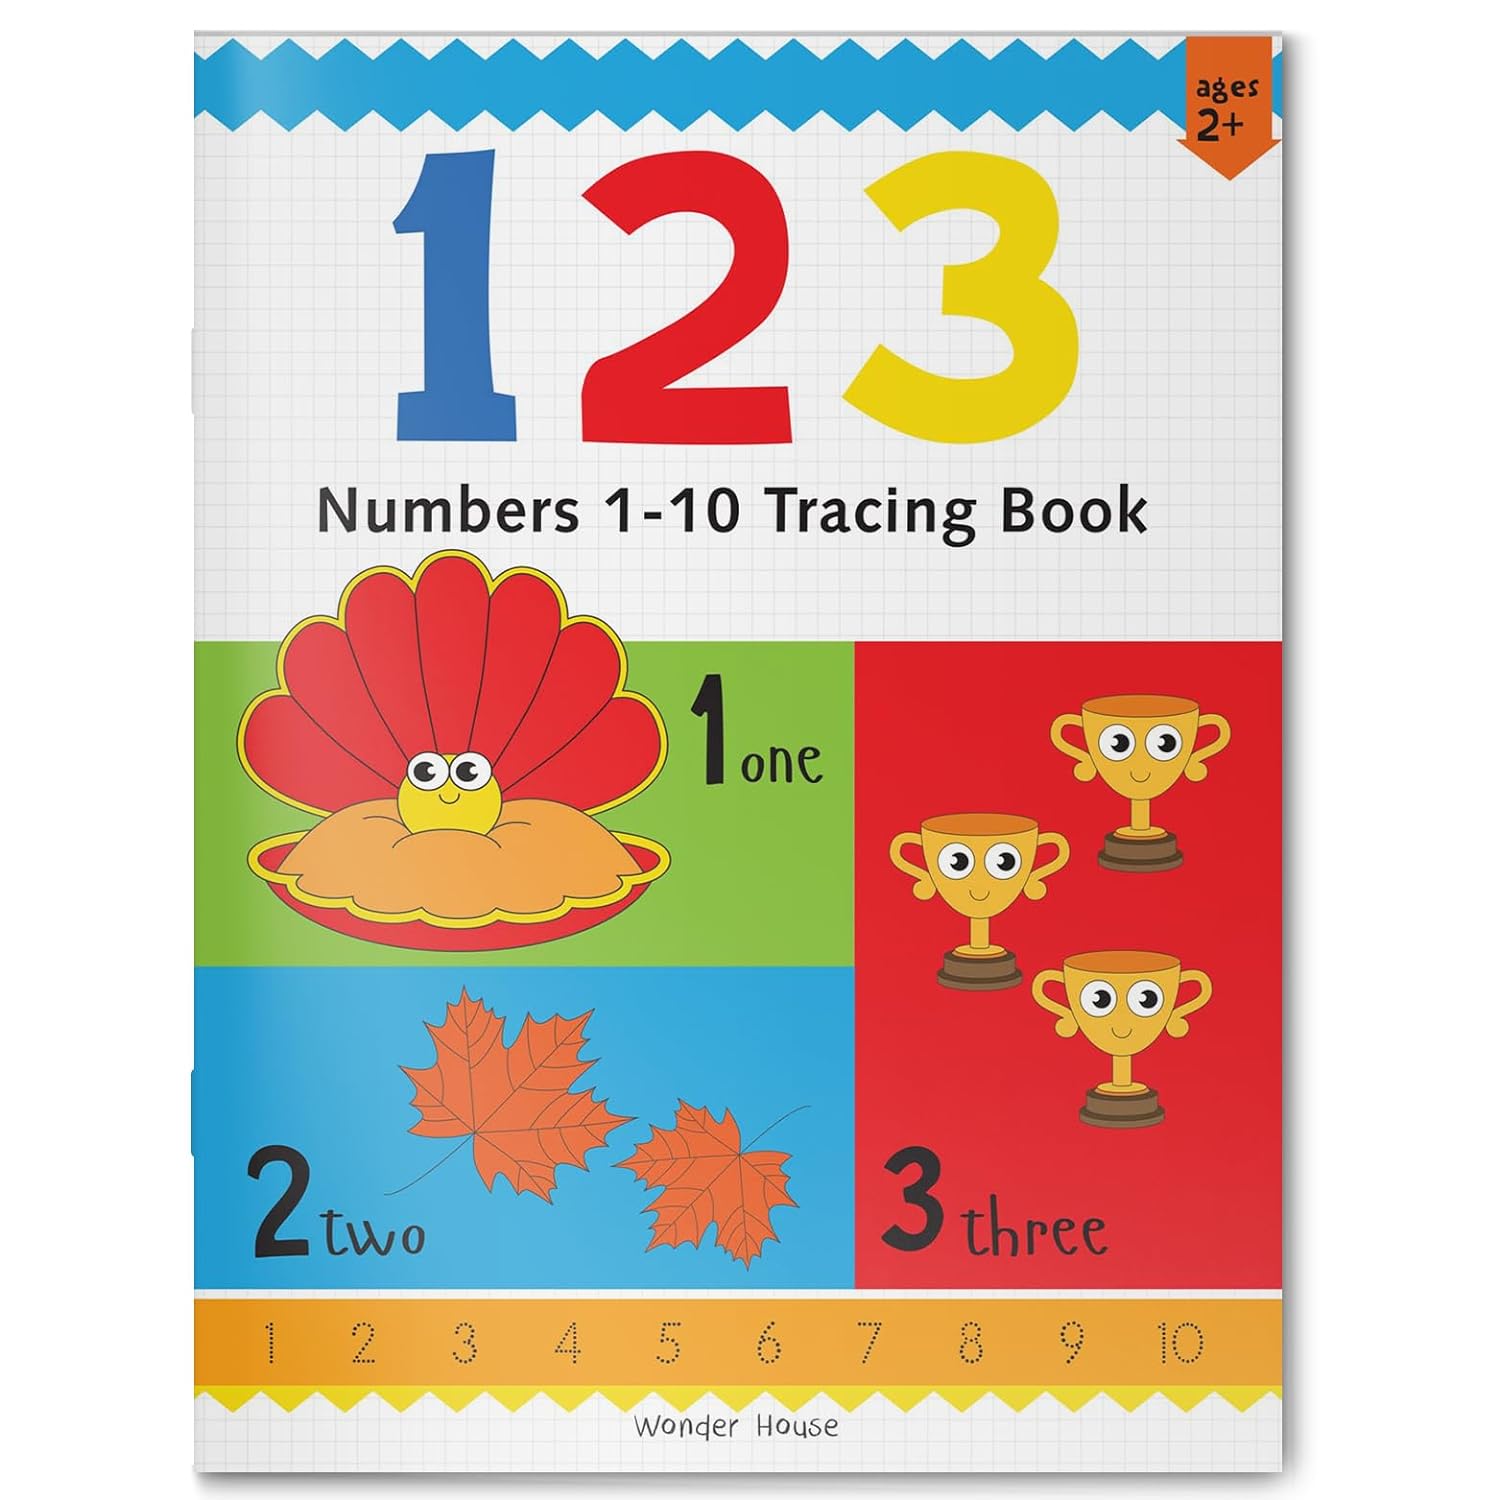 123 - Numbers 1-10 Tracing Book For Age 2+